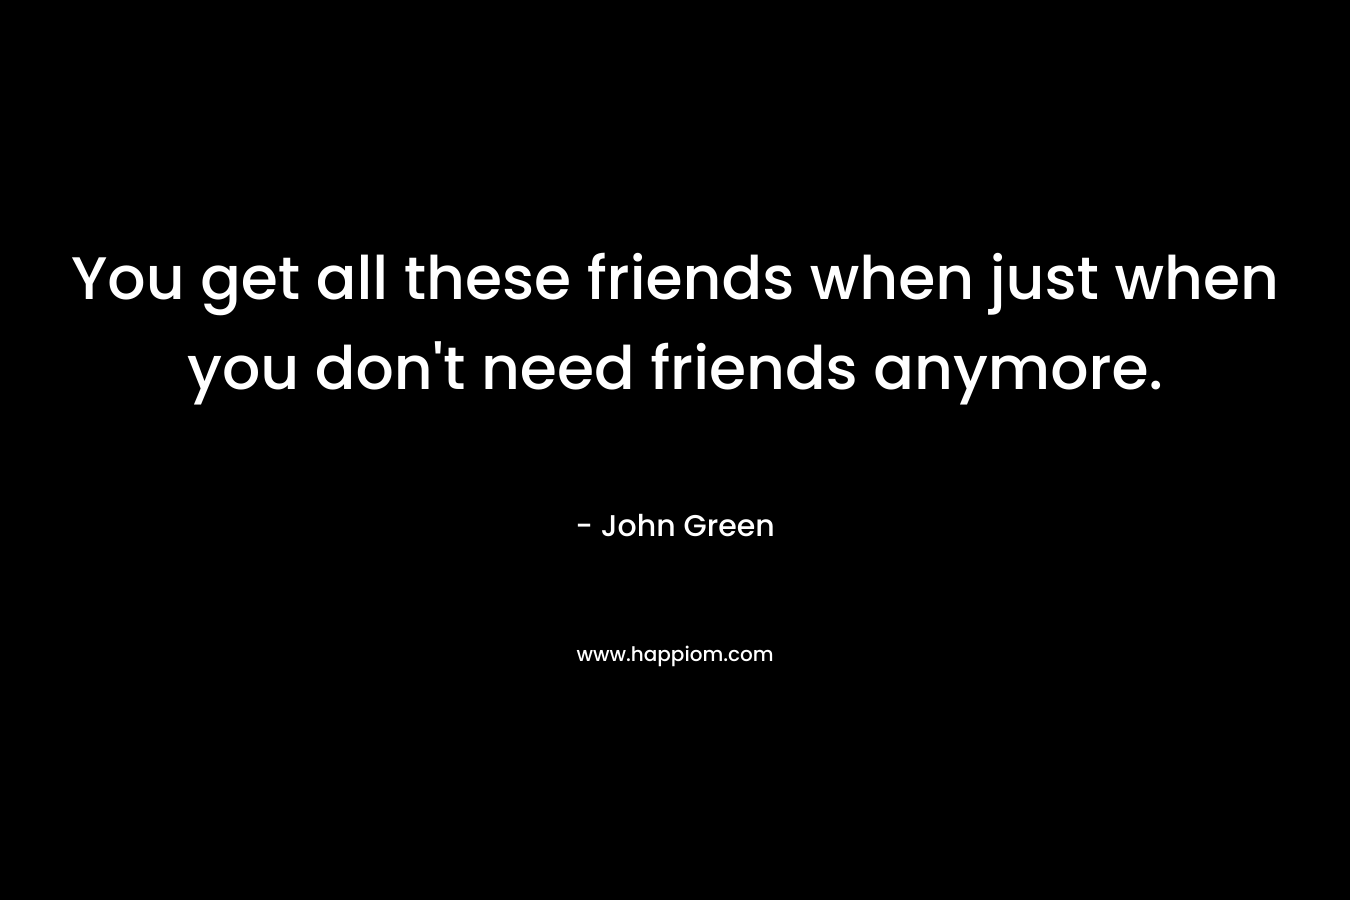 You get all these friends when just when you don't need friends anymore.